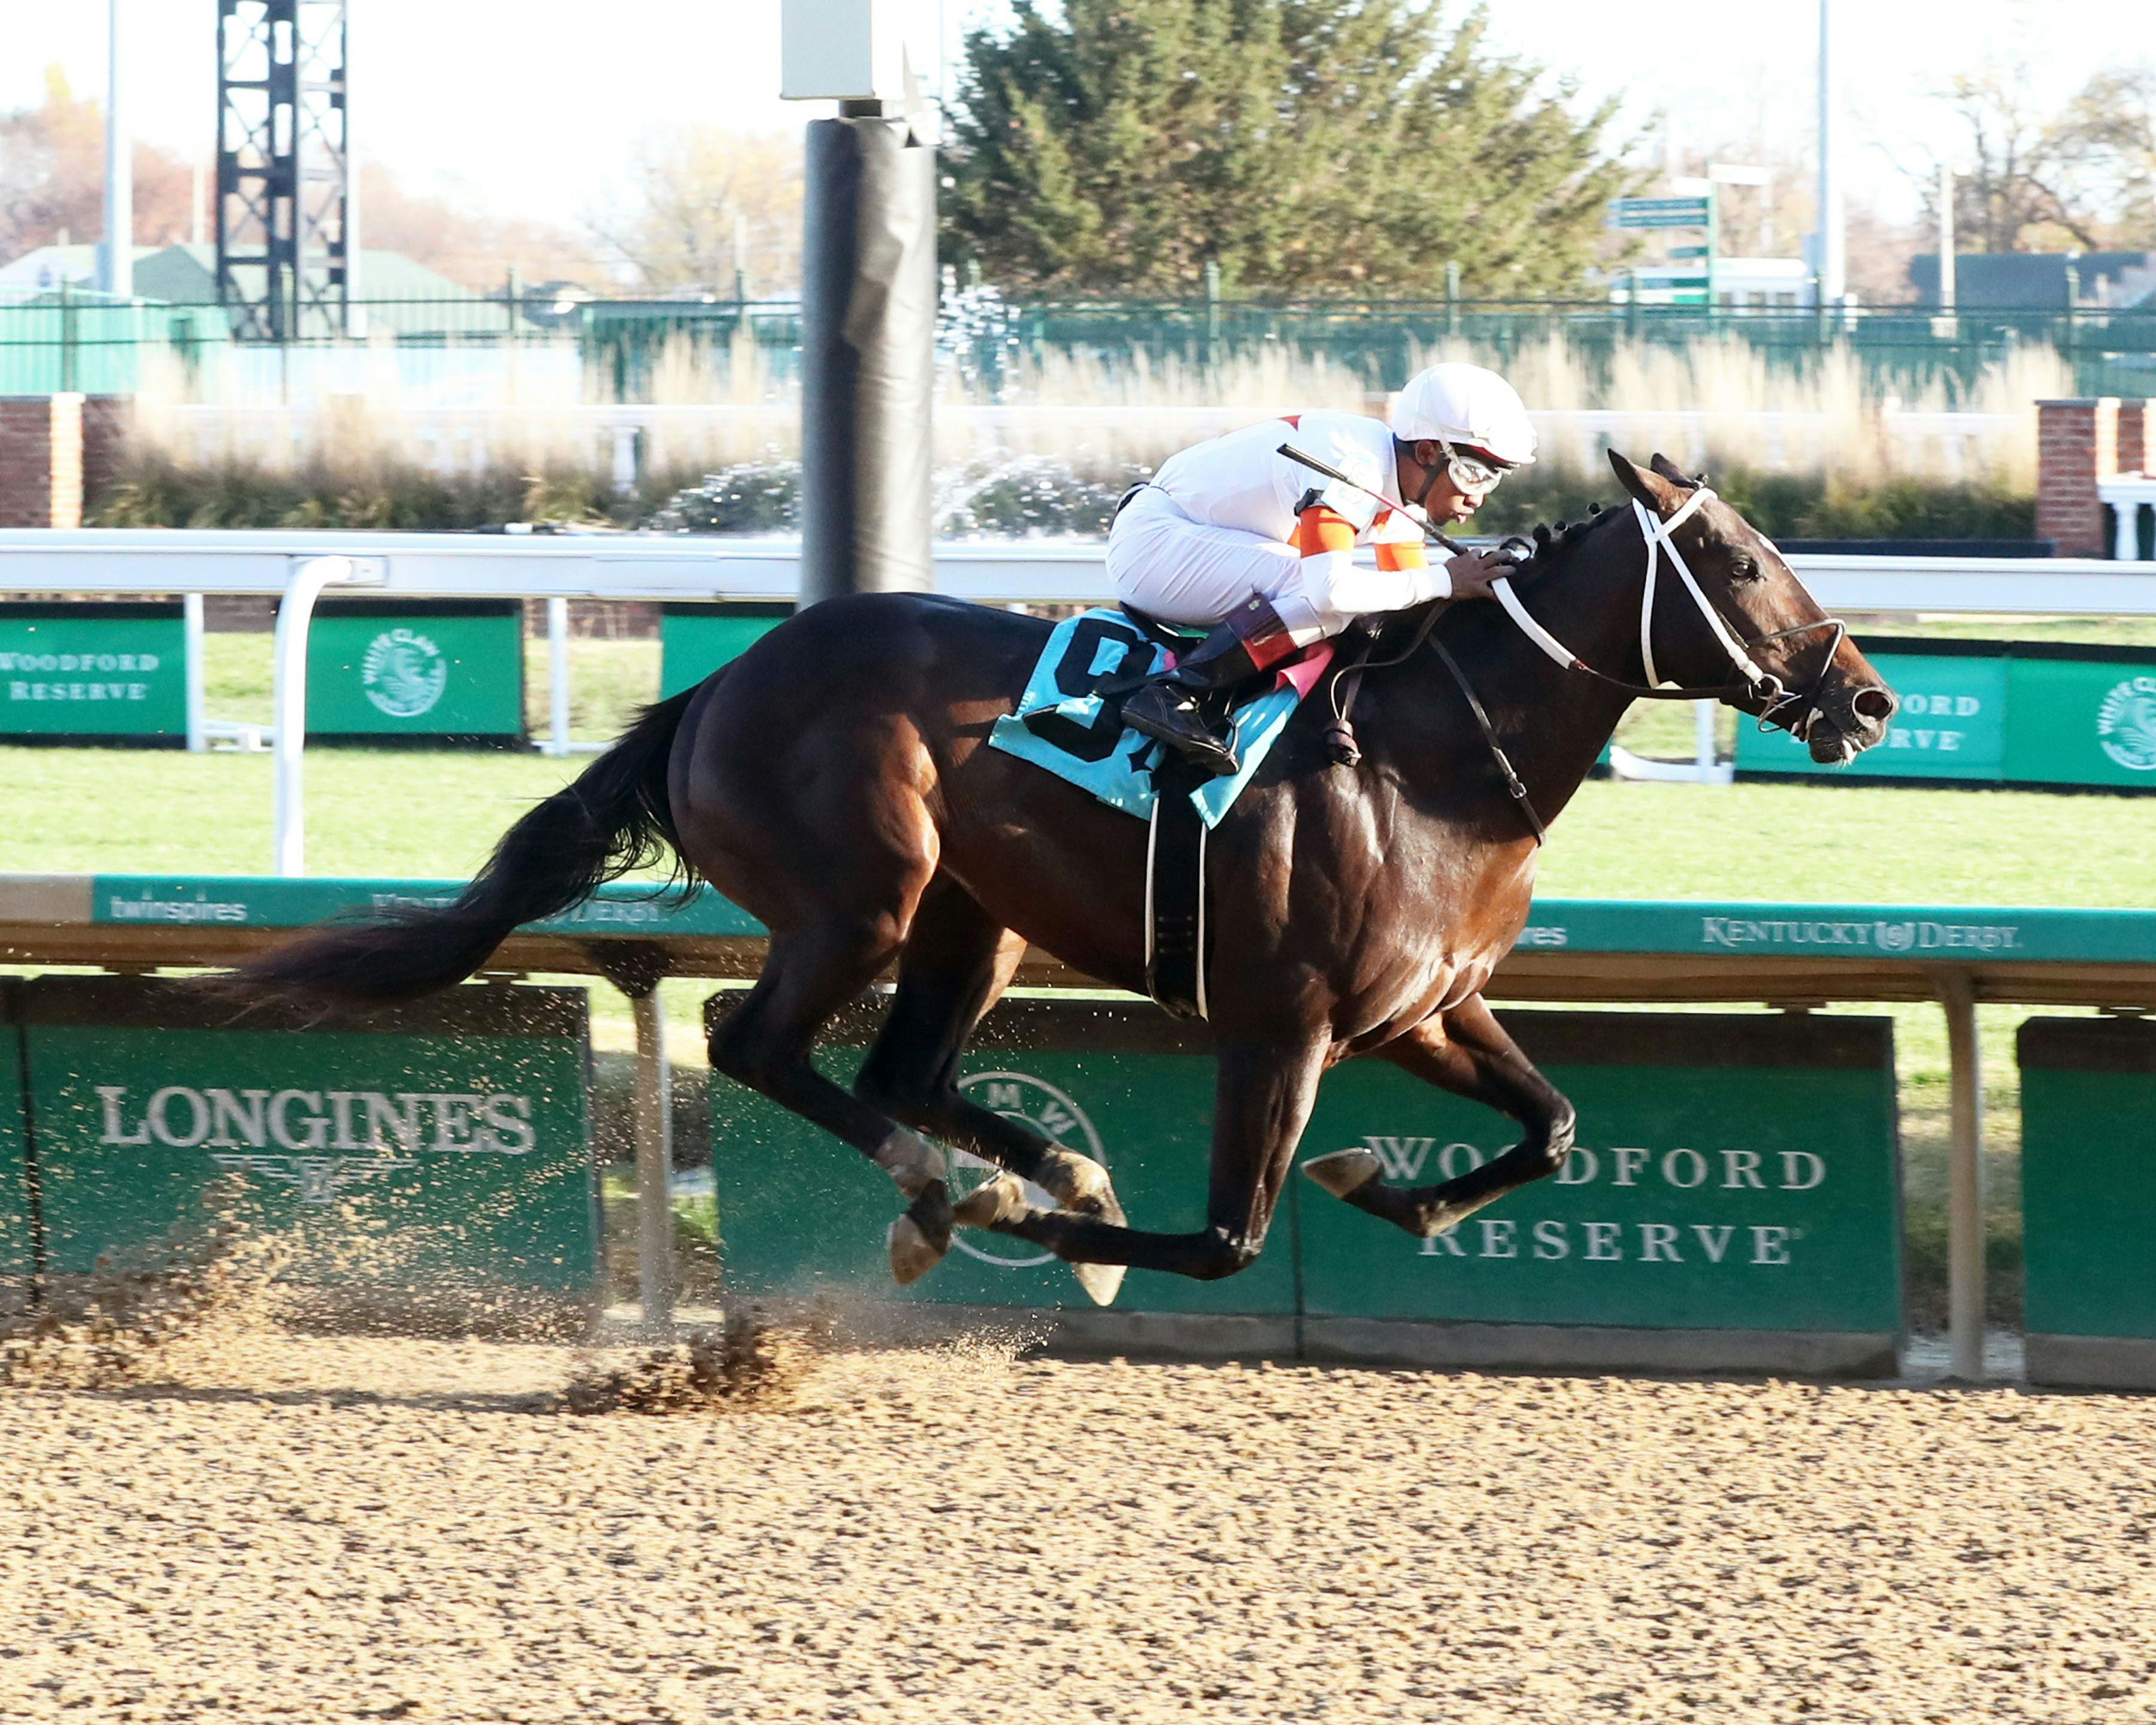 Carbone winning his debut at Churchill Downs (Photo by Coady Photography)